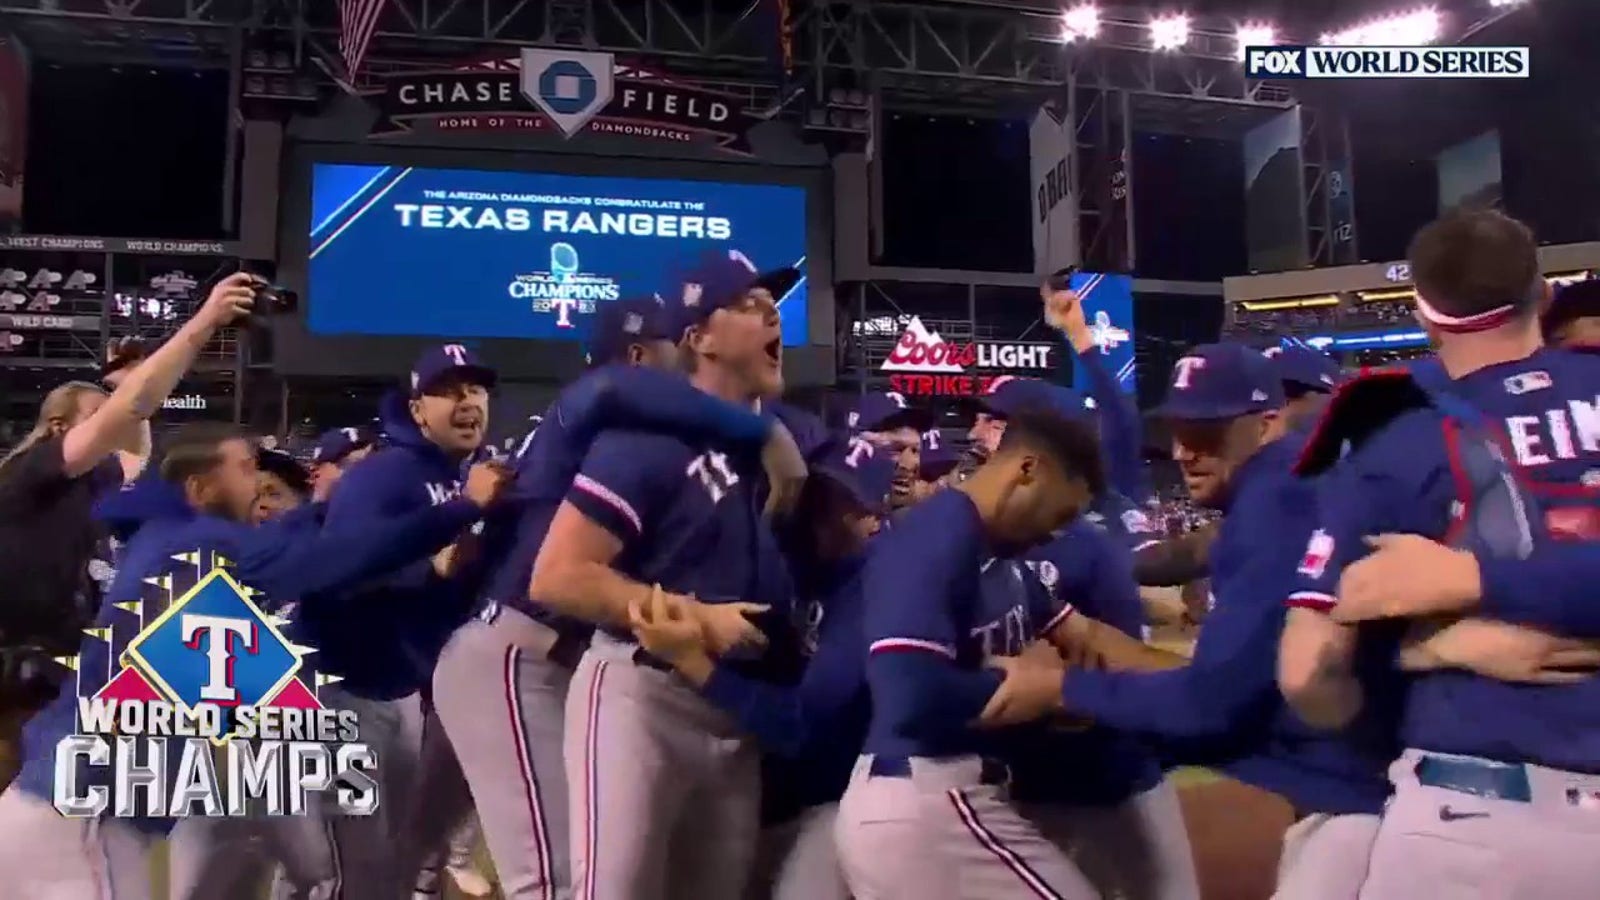 Rangers win first World Series in franchise history after defeating D-backs 5-0 in Game 5